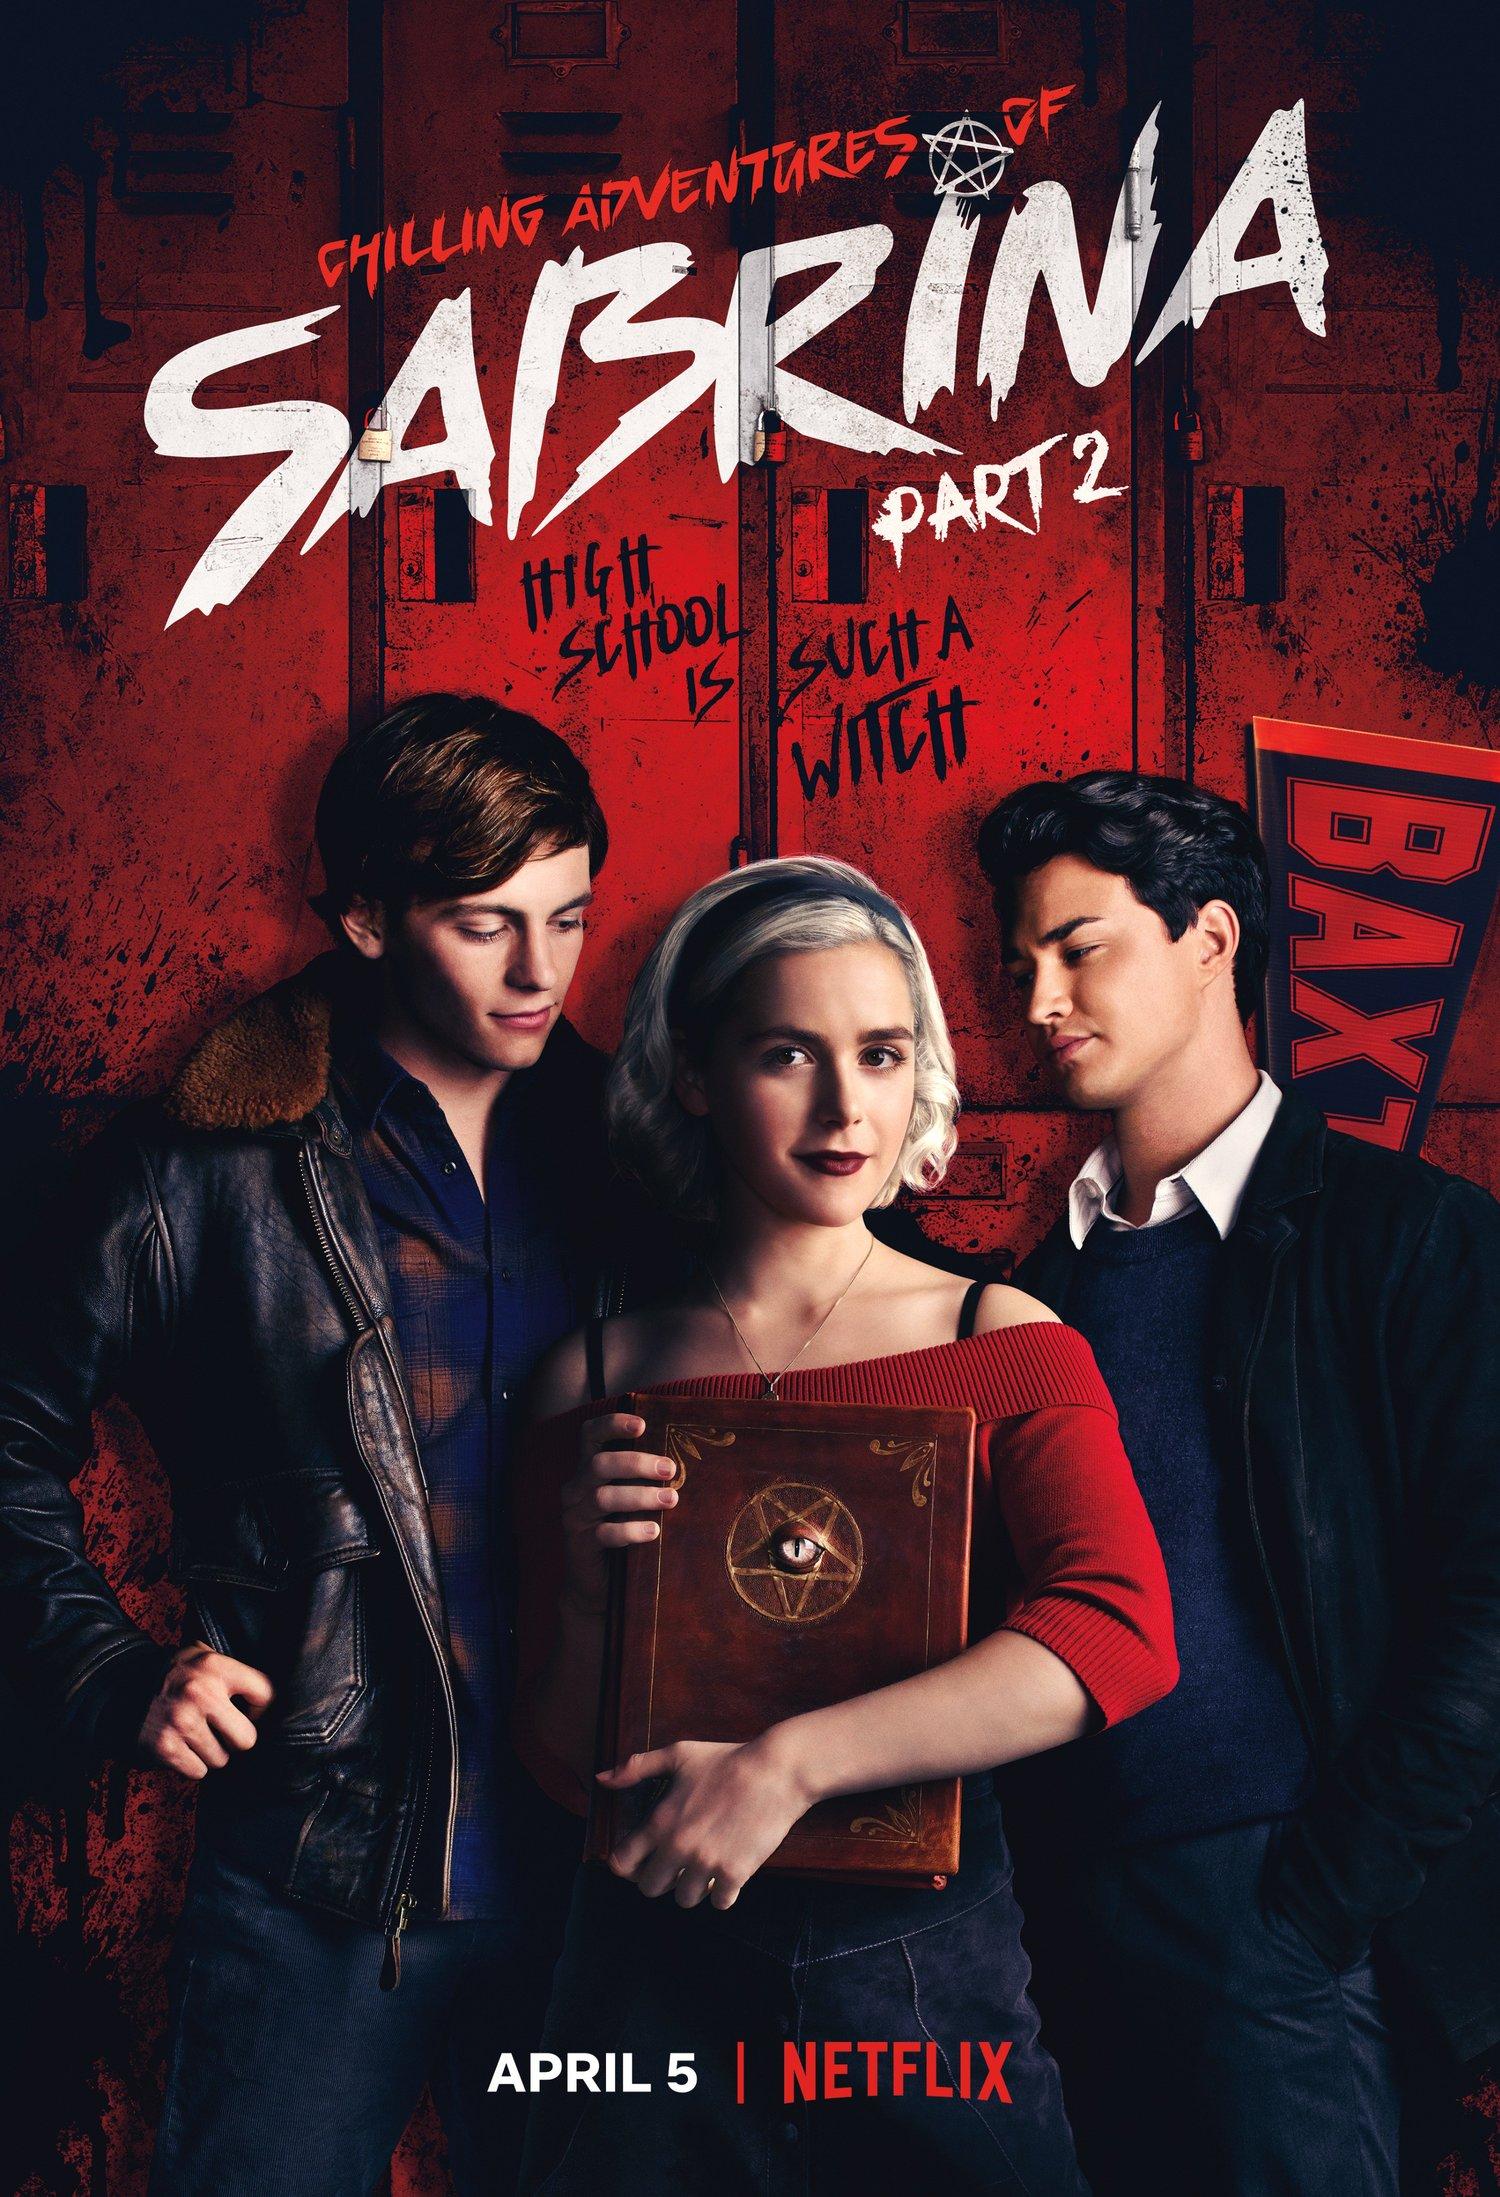 New Poster for Netflix's CHILLING ADVENTURES OF SABRINA Part 2